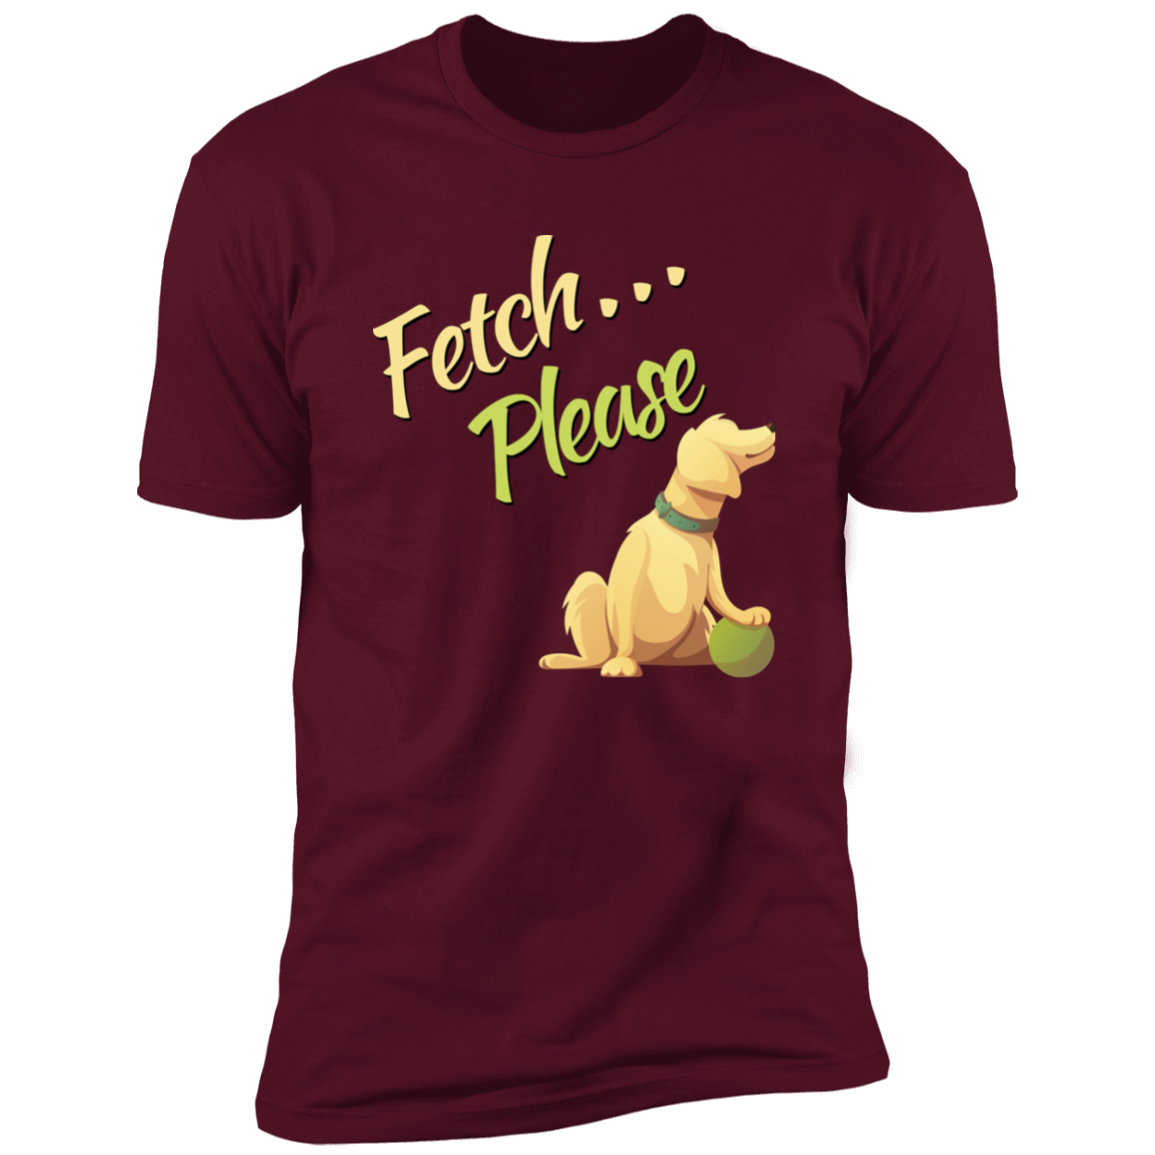 Fetch Please funny dog t-shirt, funny dog shirt for humans, in maroon